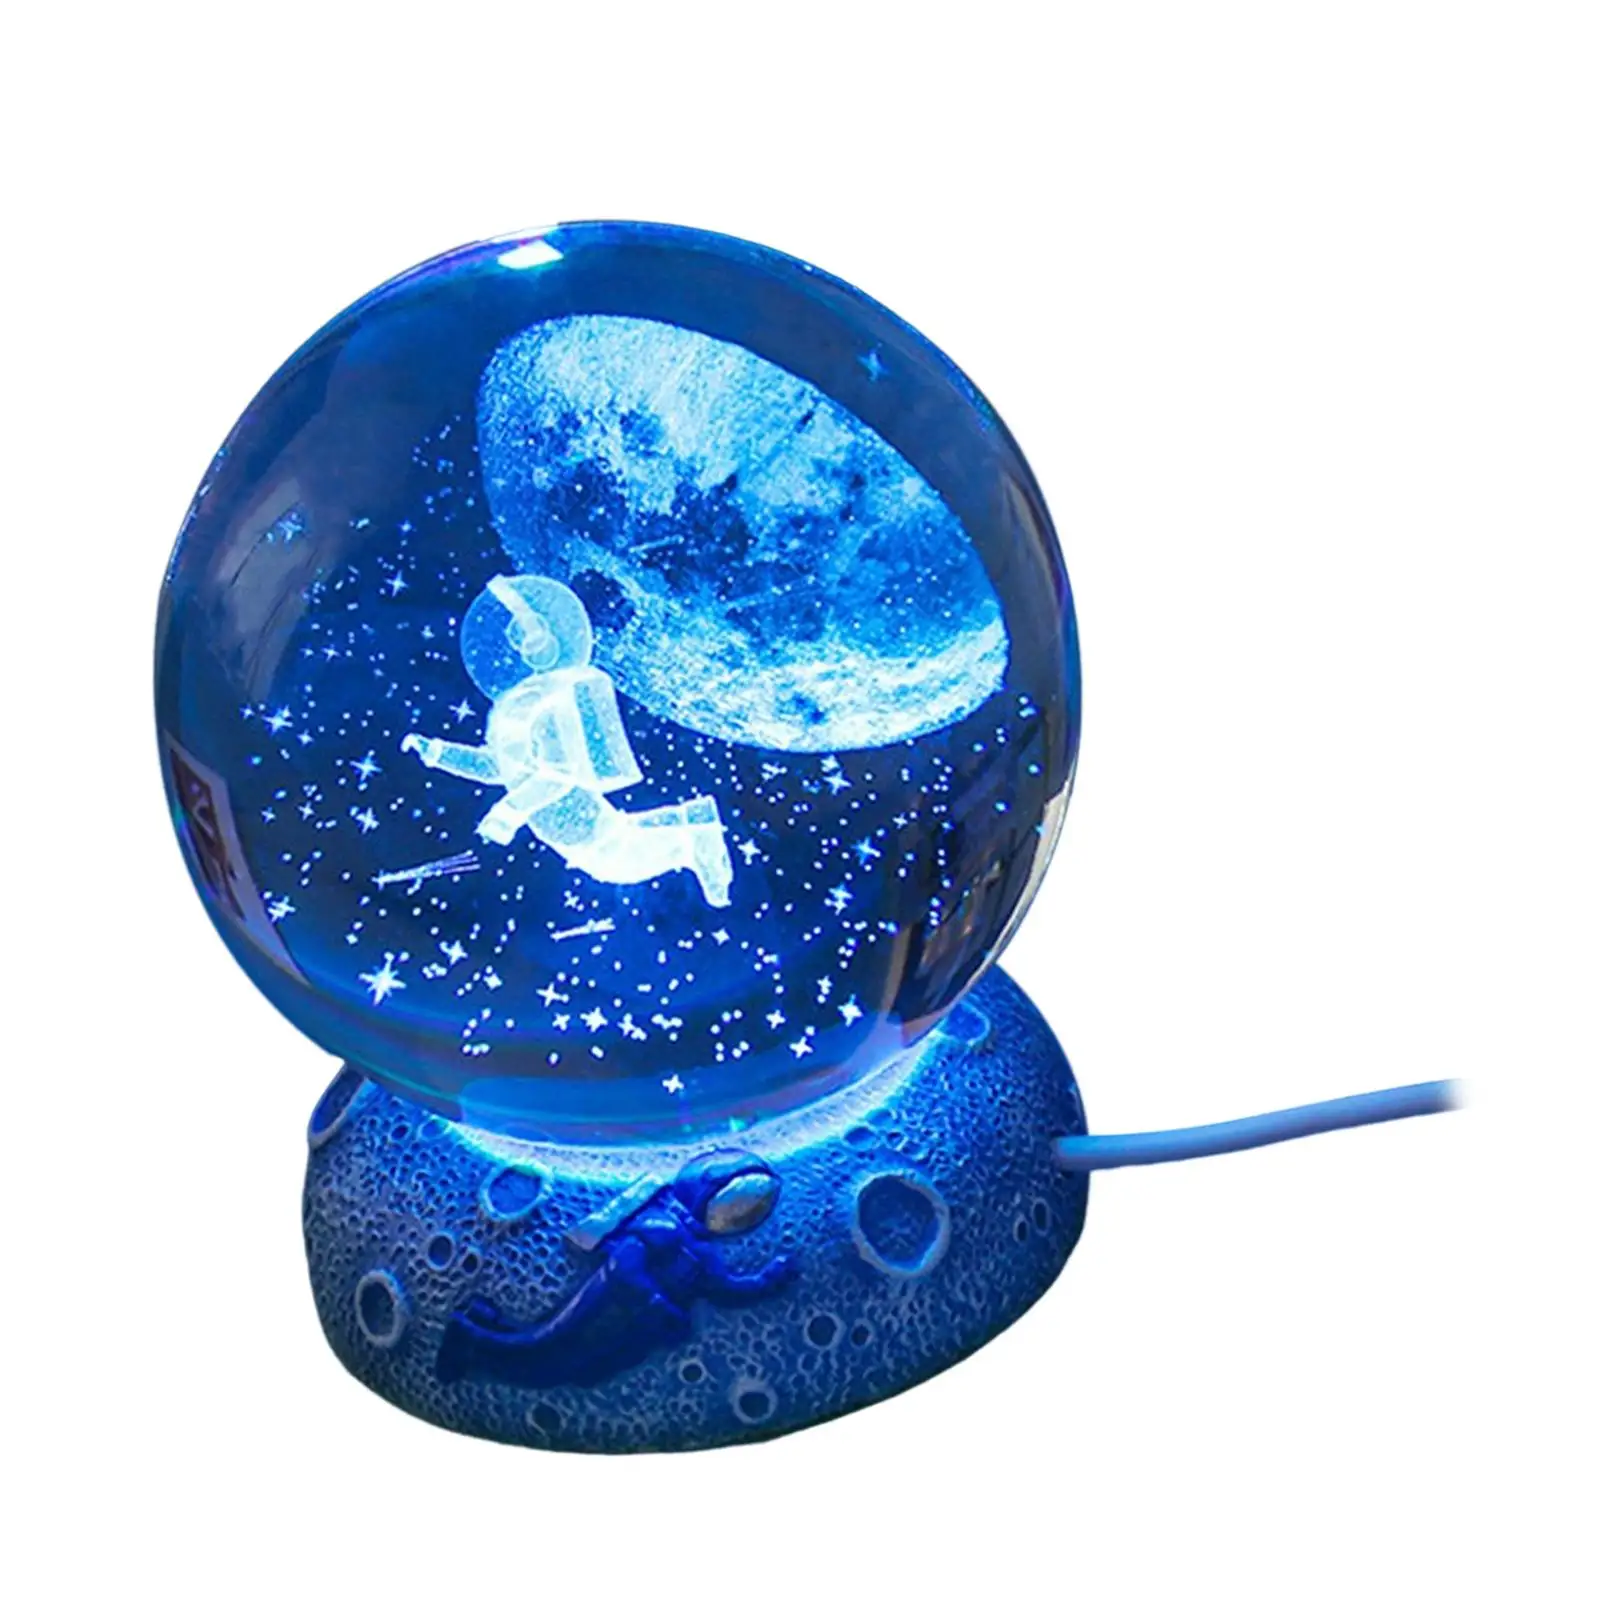 Modern Ball Night Light with Resin Base Bedside Lamp Decorative Moon Light for Bedroom Living Room Home Decor Ornament